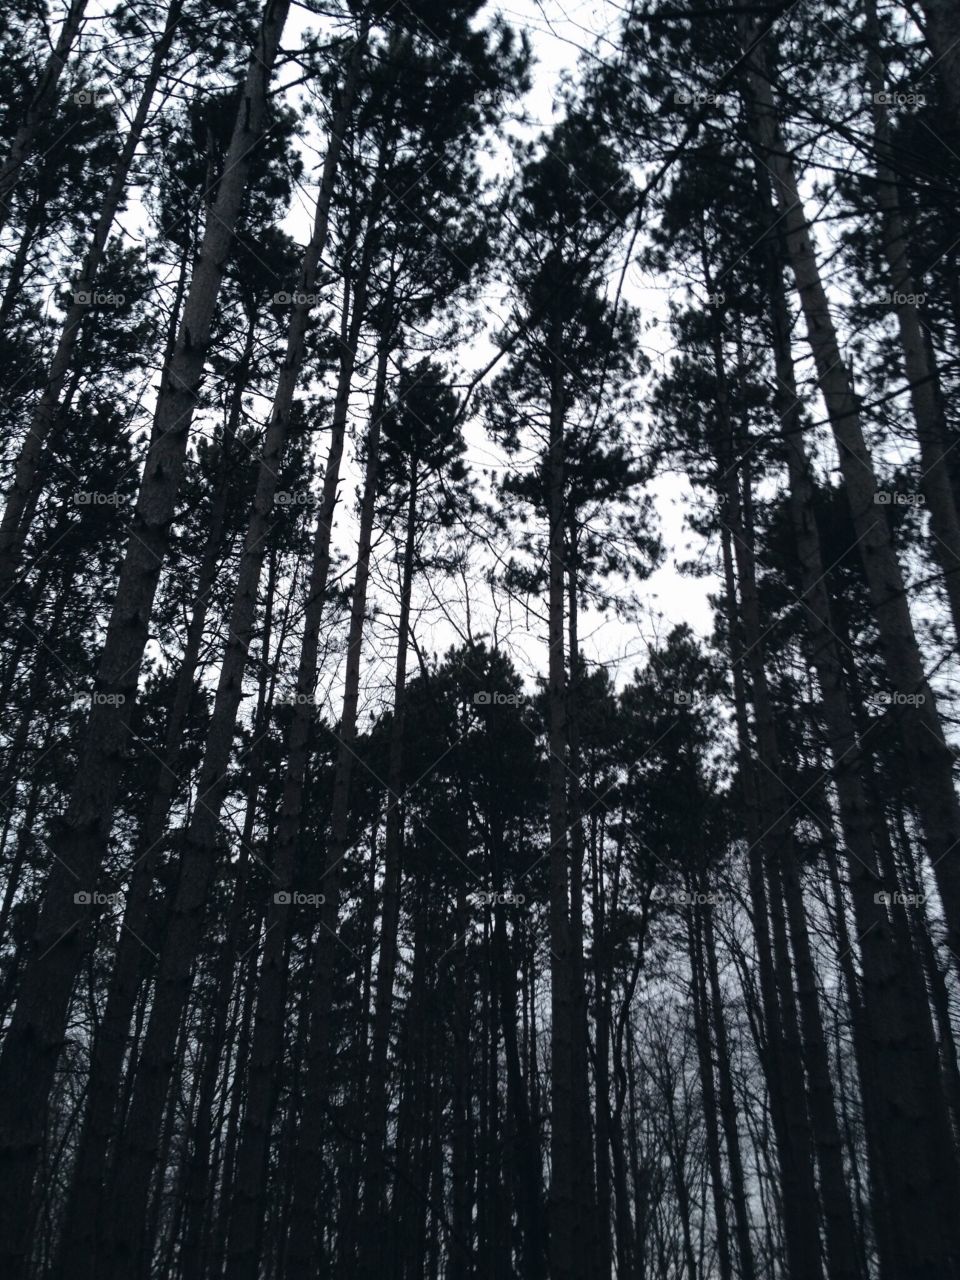 Looking up in the Forest - Google Photos Mission